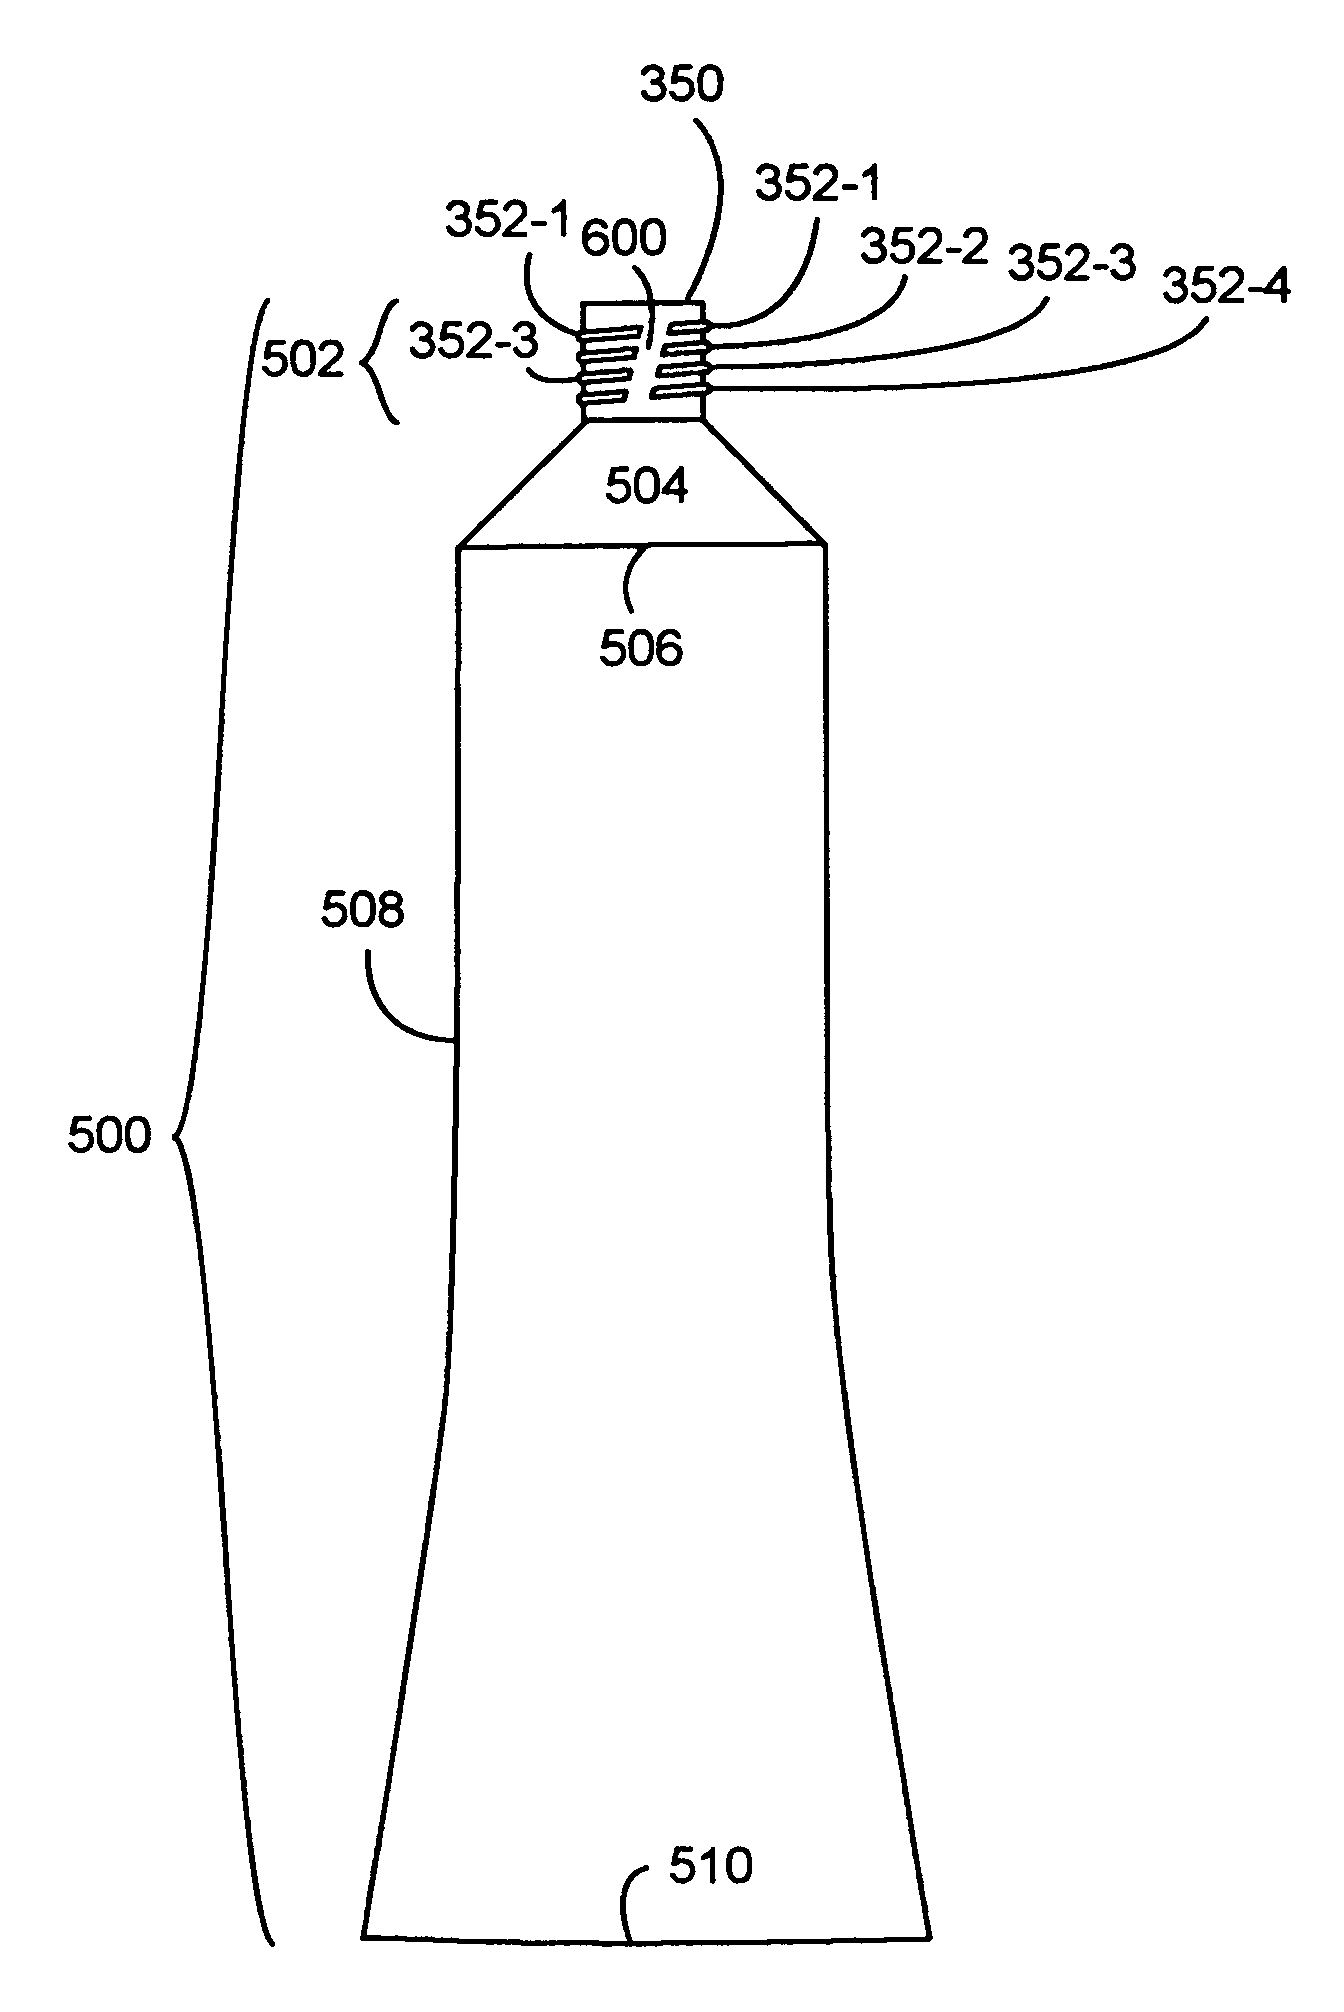 Apparatus and method for open thread, reusable, no-waste collapsible tube dispensers